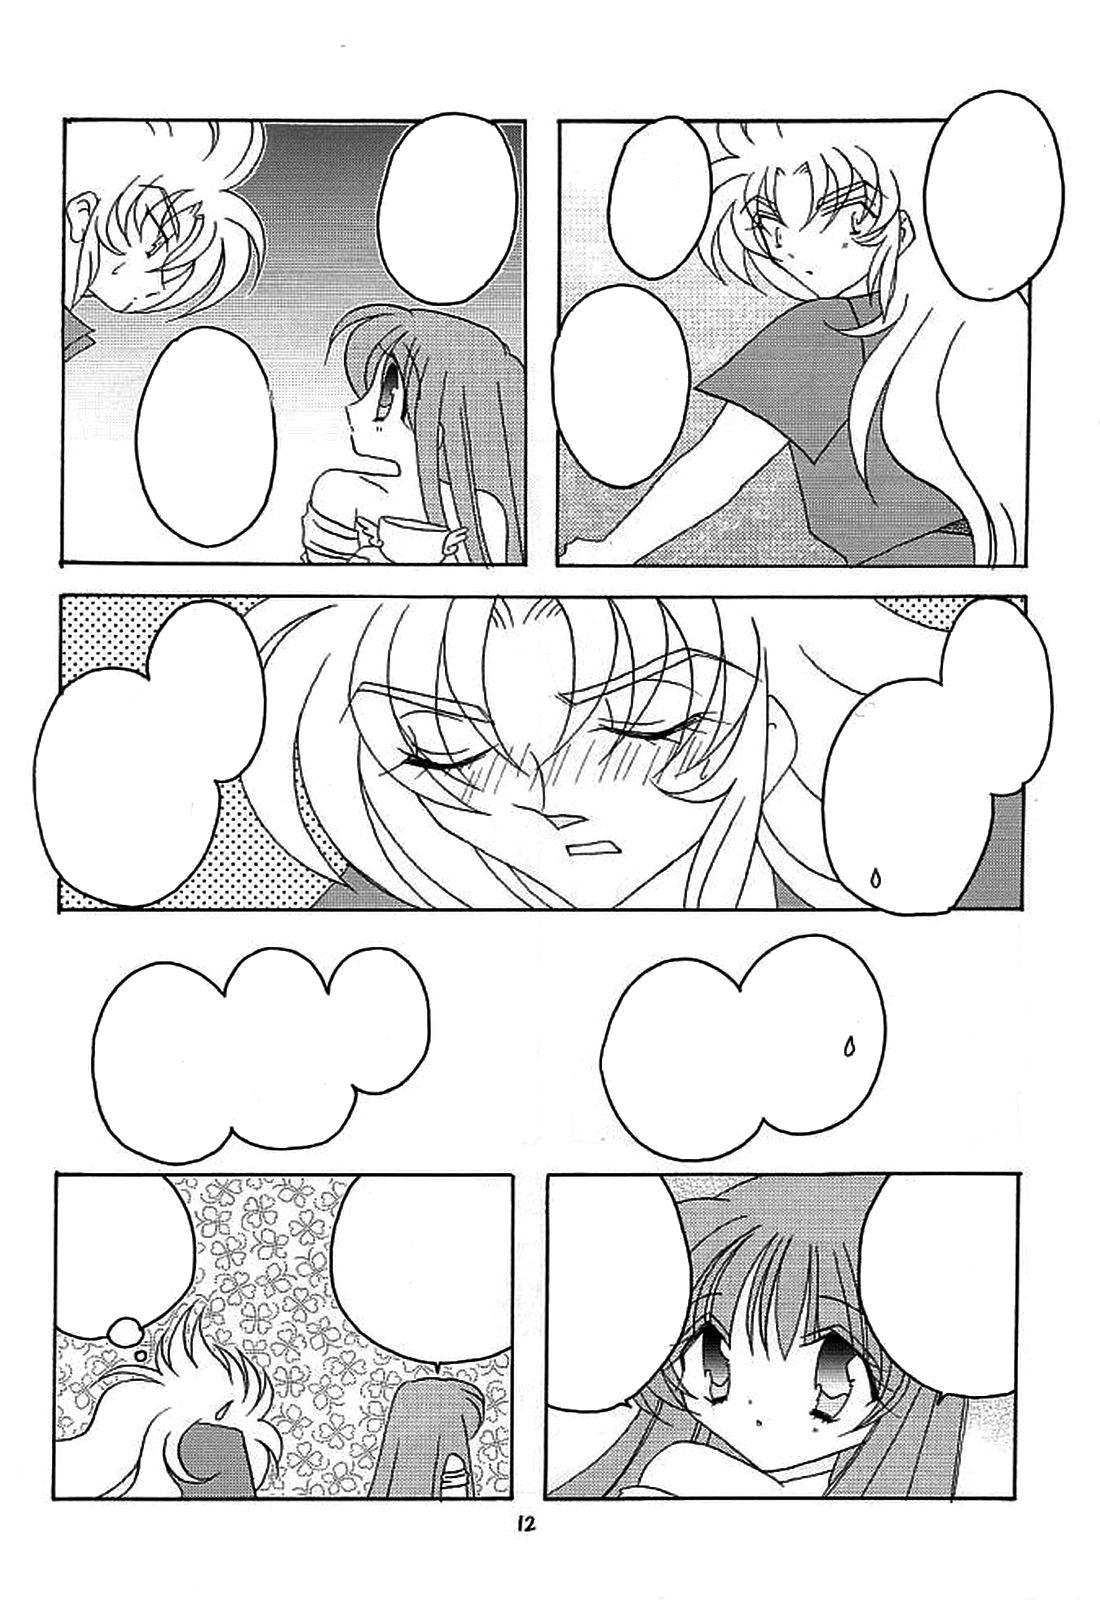 Three Some You are my Reason to Be 6 - Saint seiya Free Amature Porn - Page 11